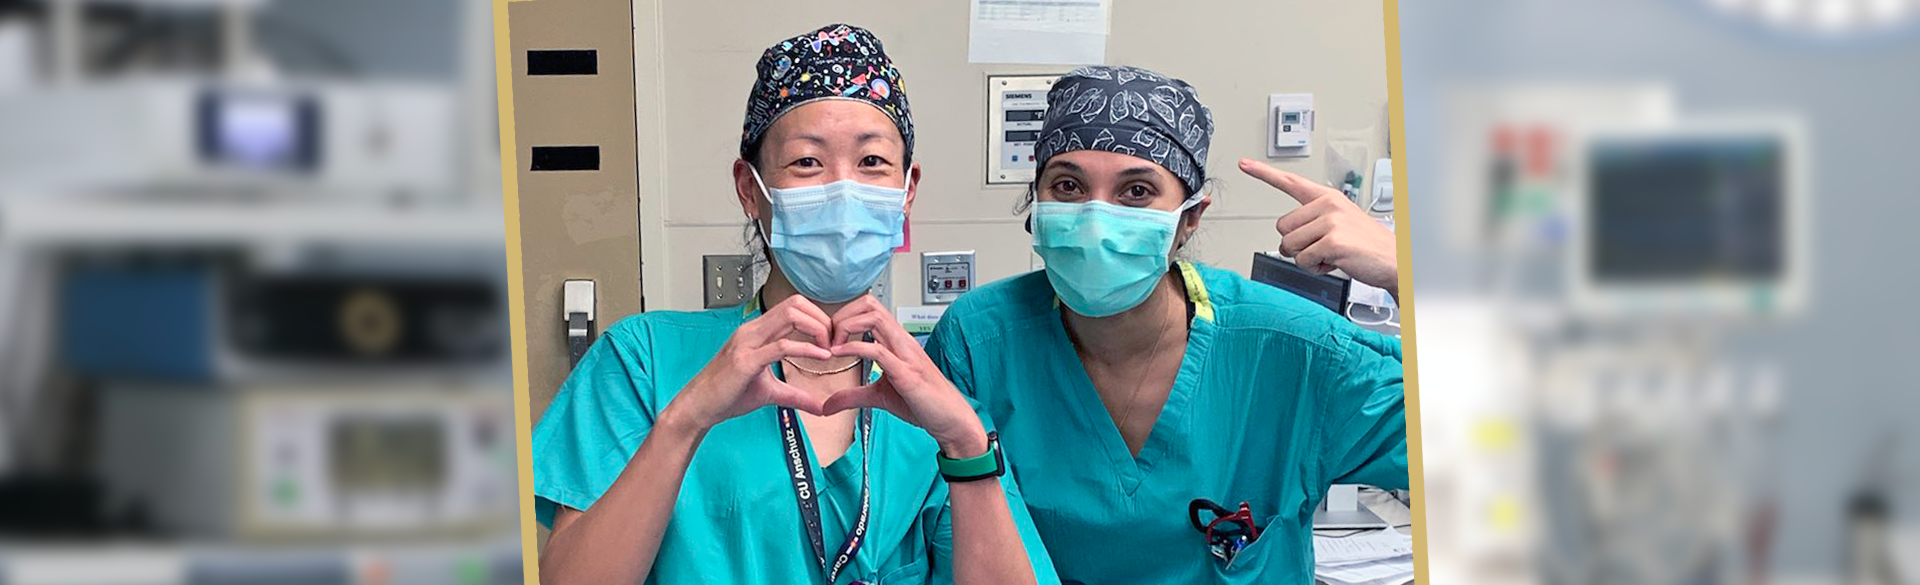 Jessica Rove, MD, and Simran Randhawa, MBBS, of the University of Colorado Division of Cardiothoracic Surgery